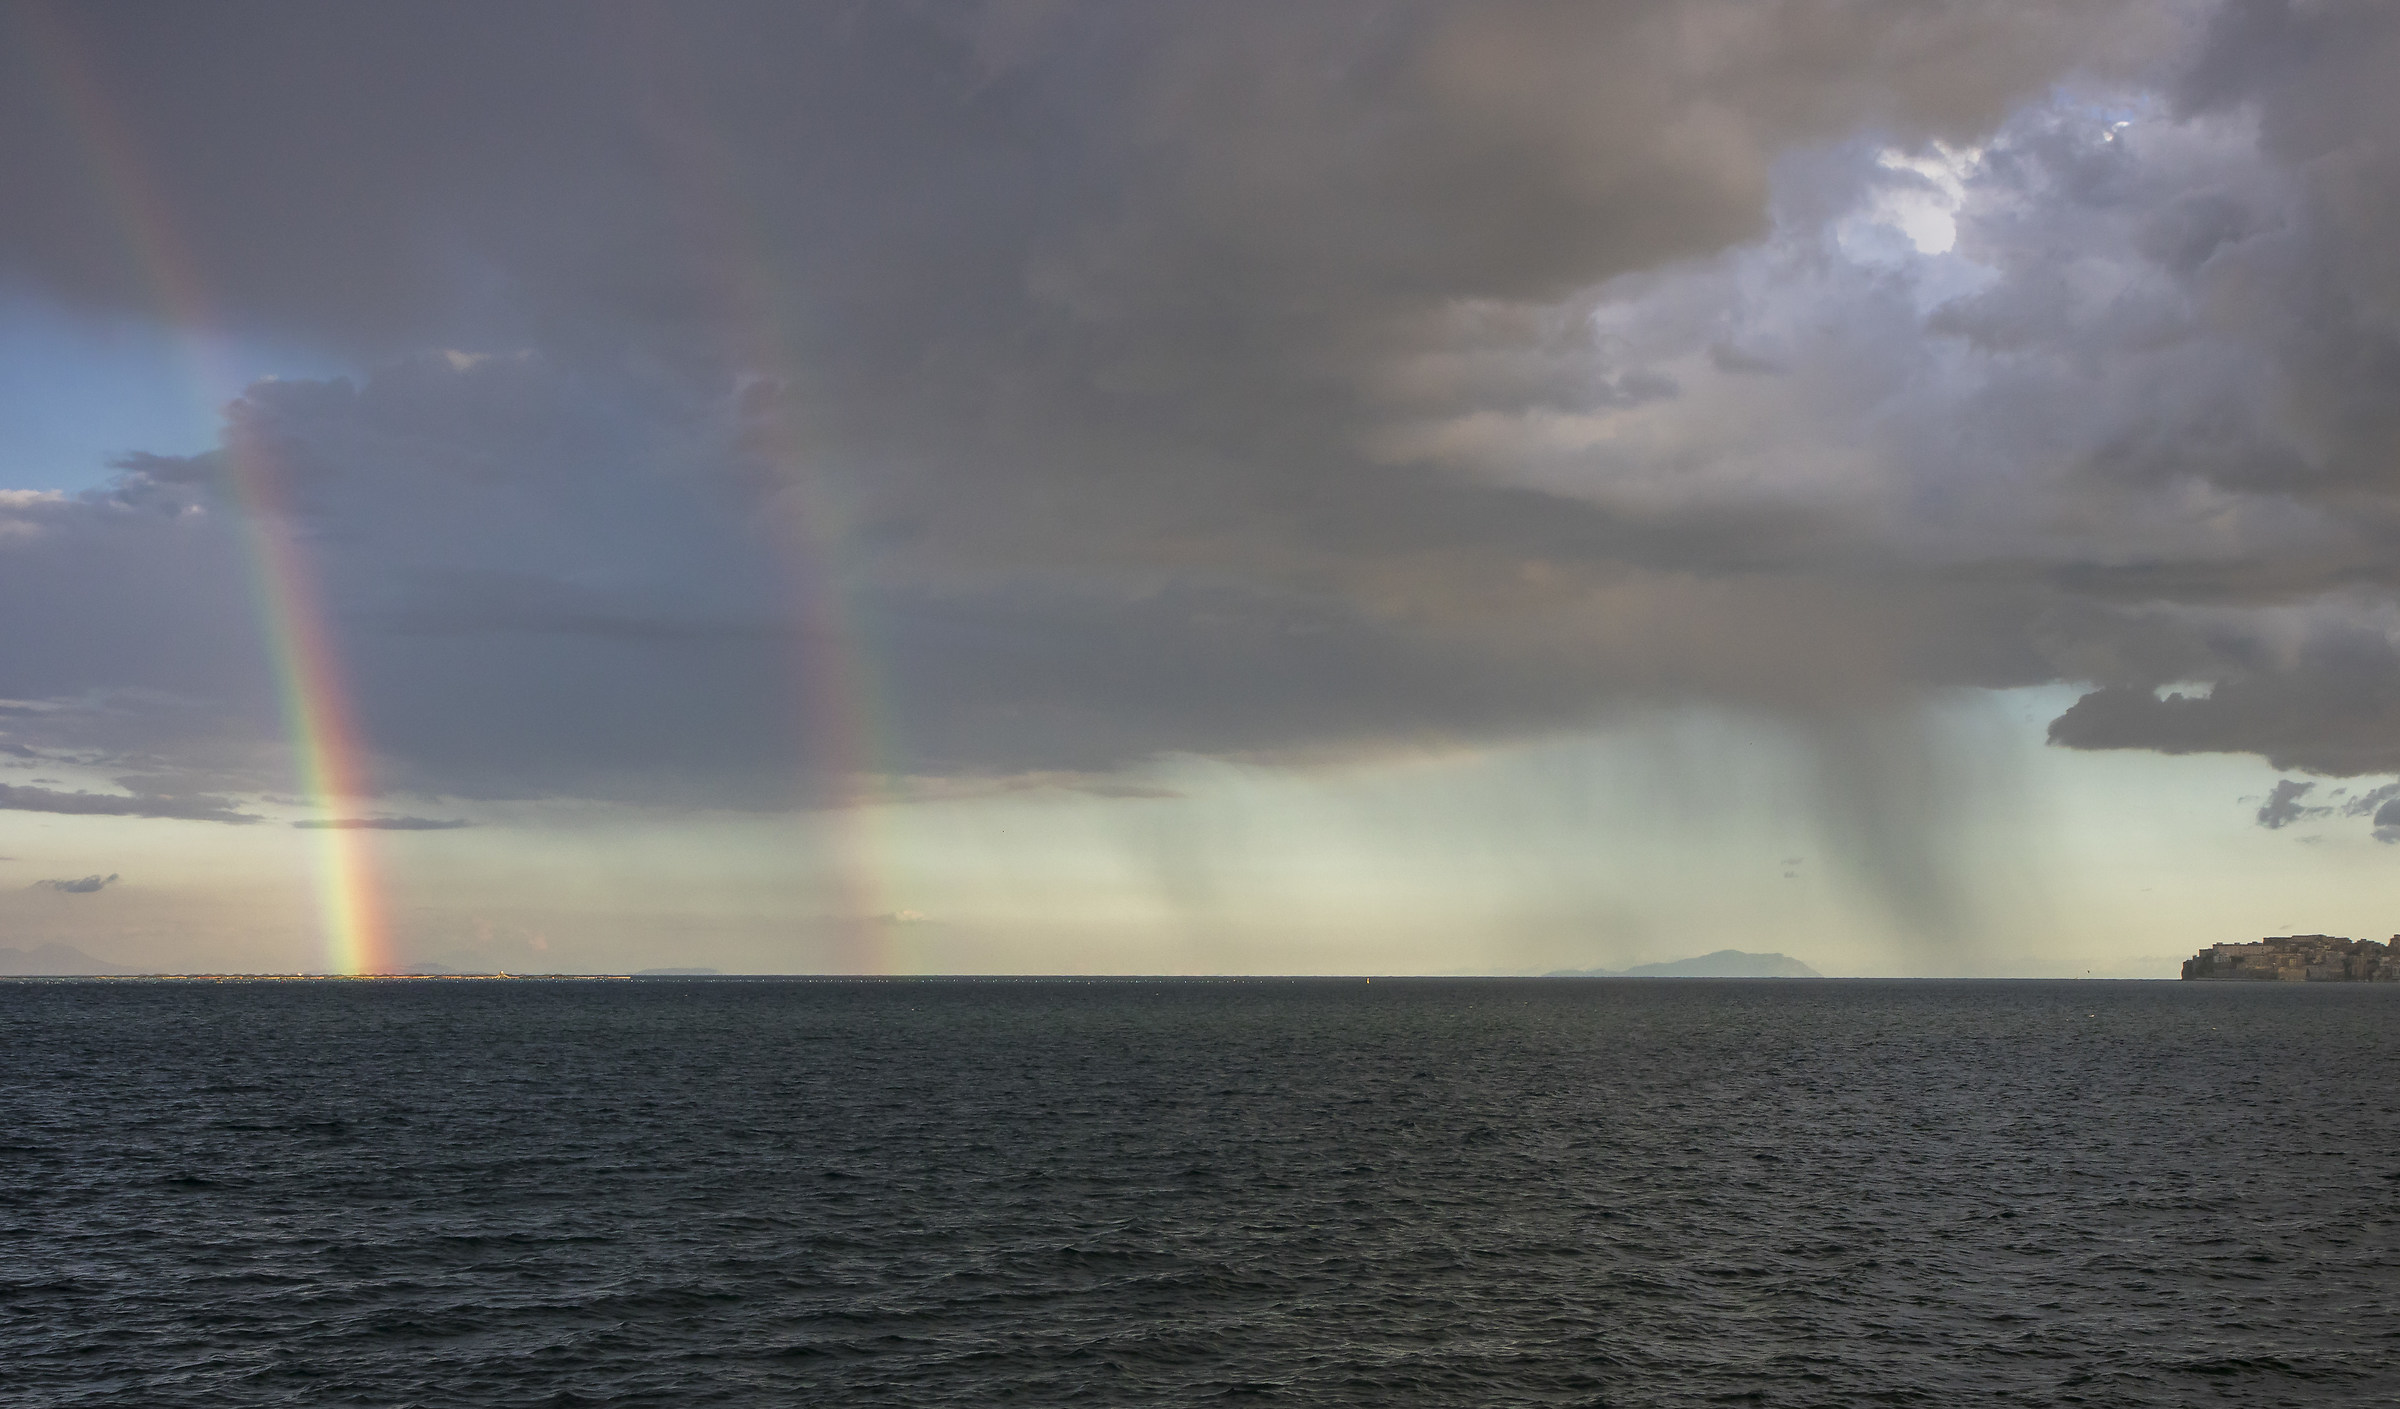 Two rainbows, the sea and the rain...